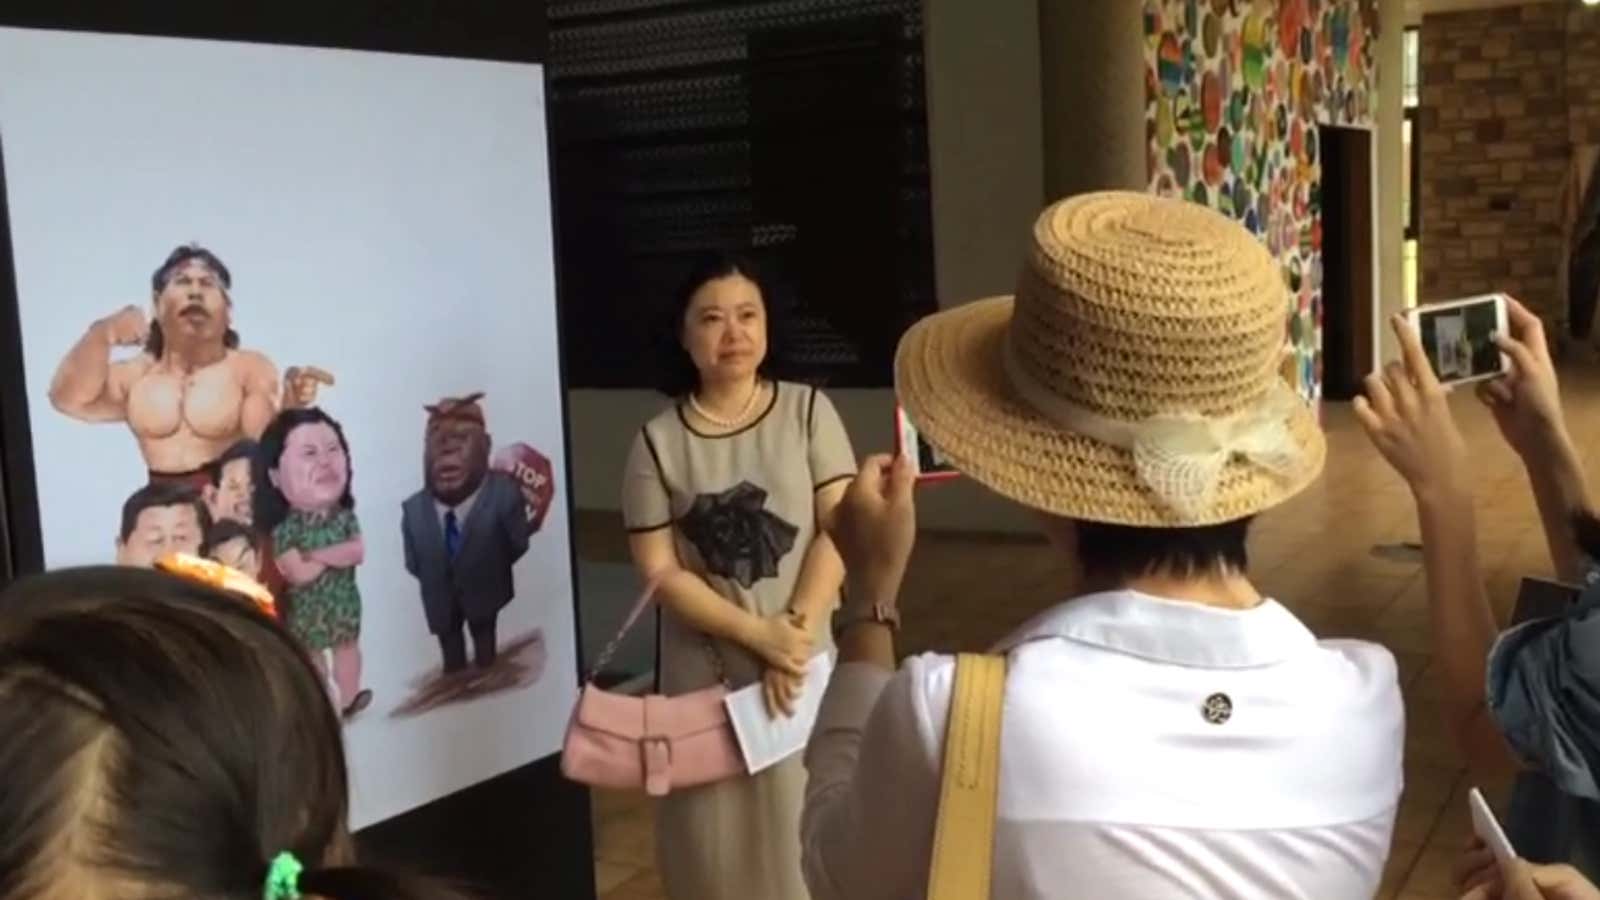 China’s ambassador to Ghana, Sun Baohong, poses with a cartoon criticizing China’s role in Africa.